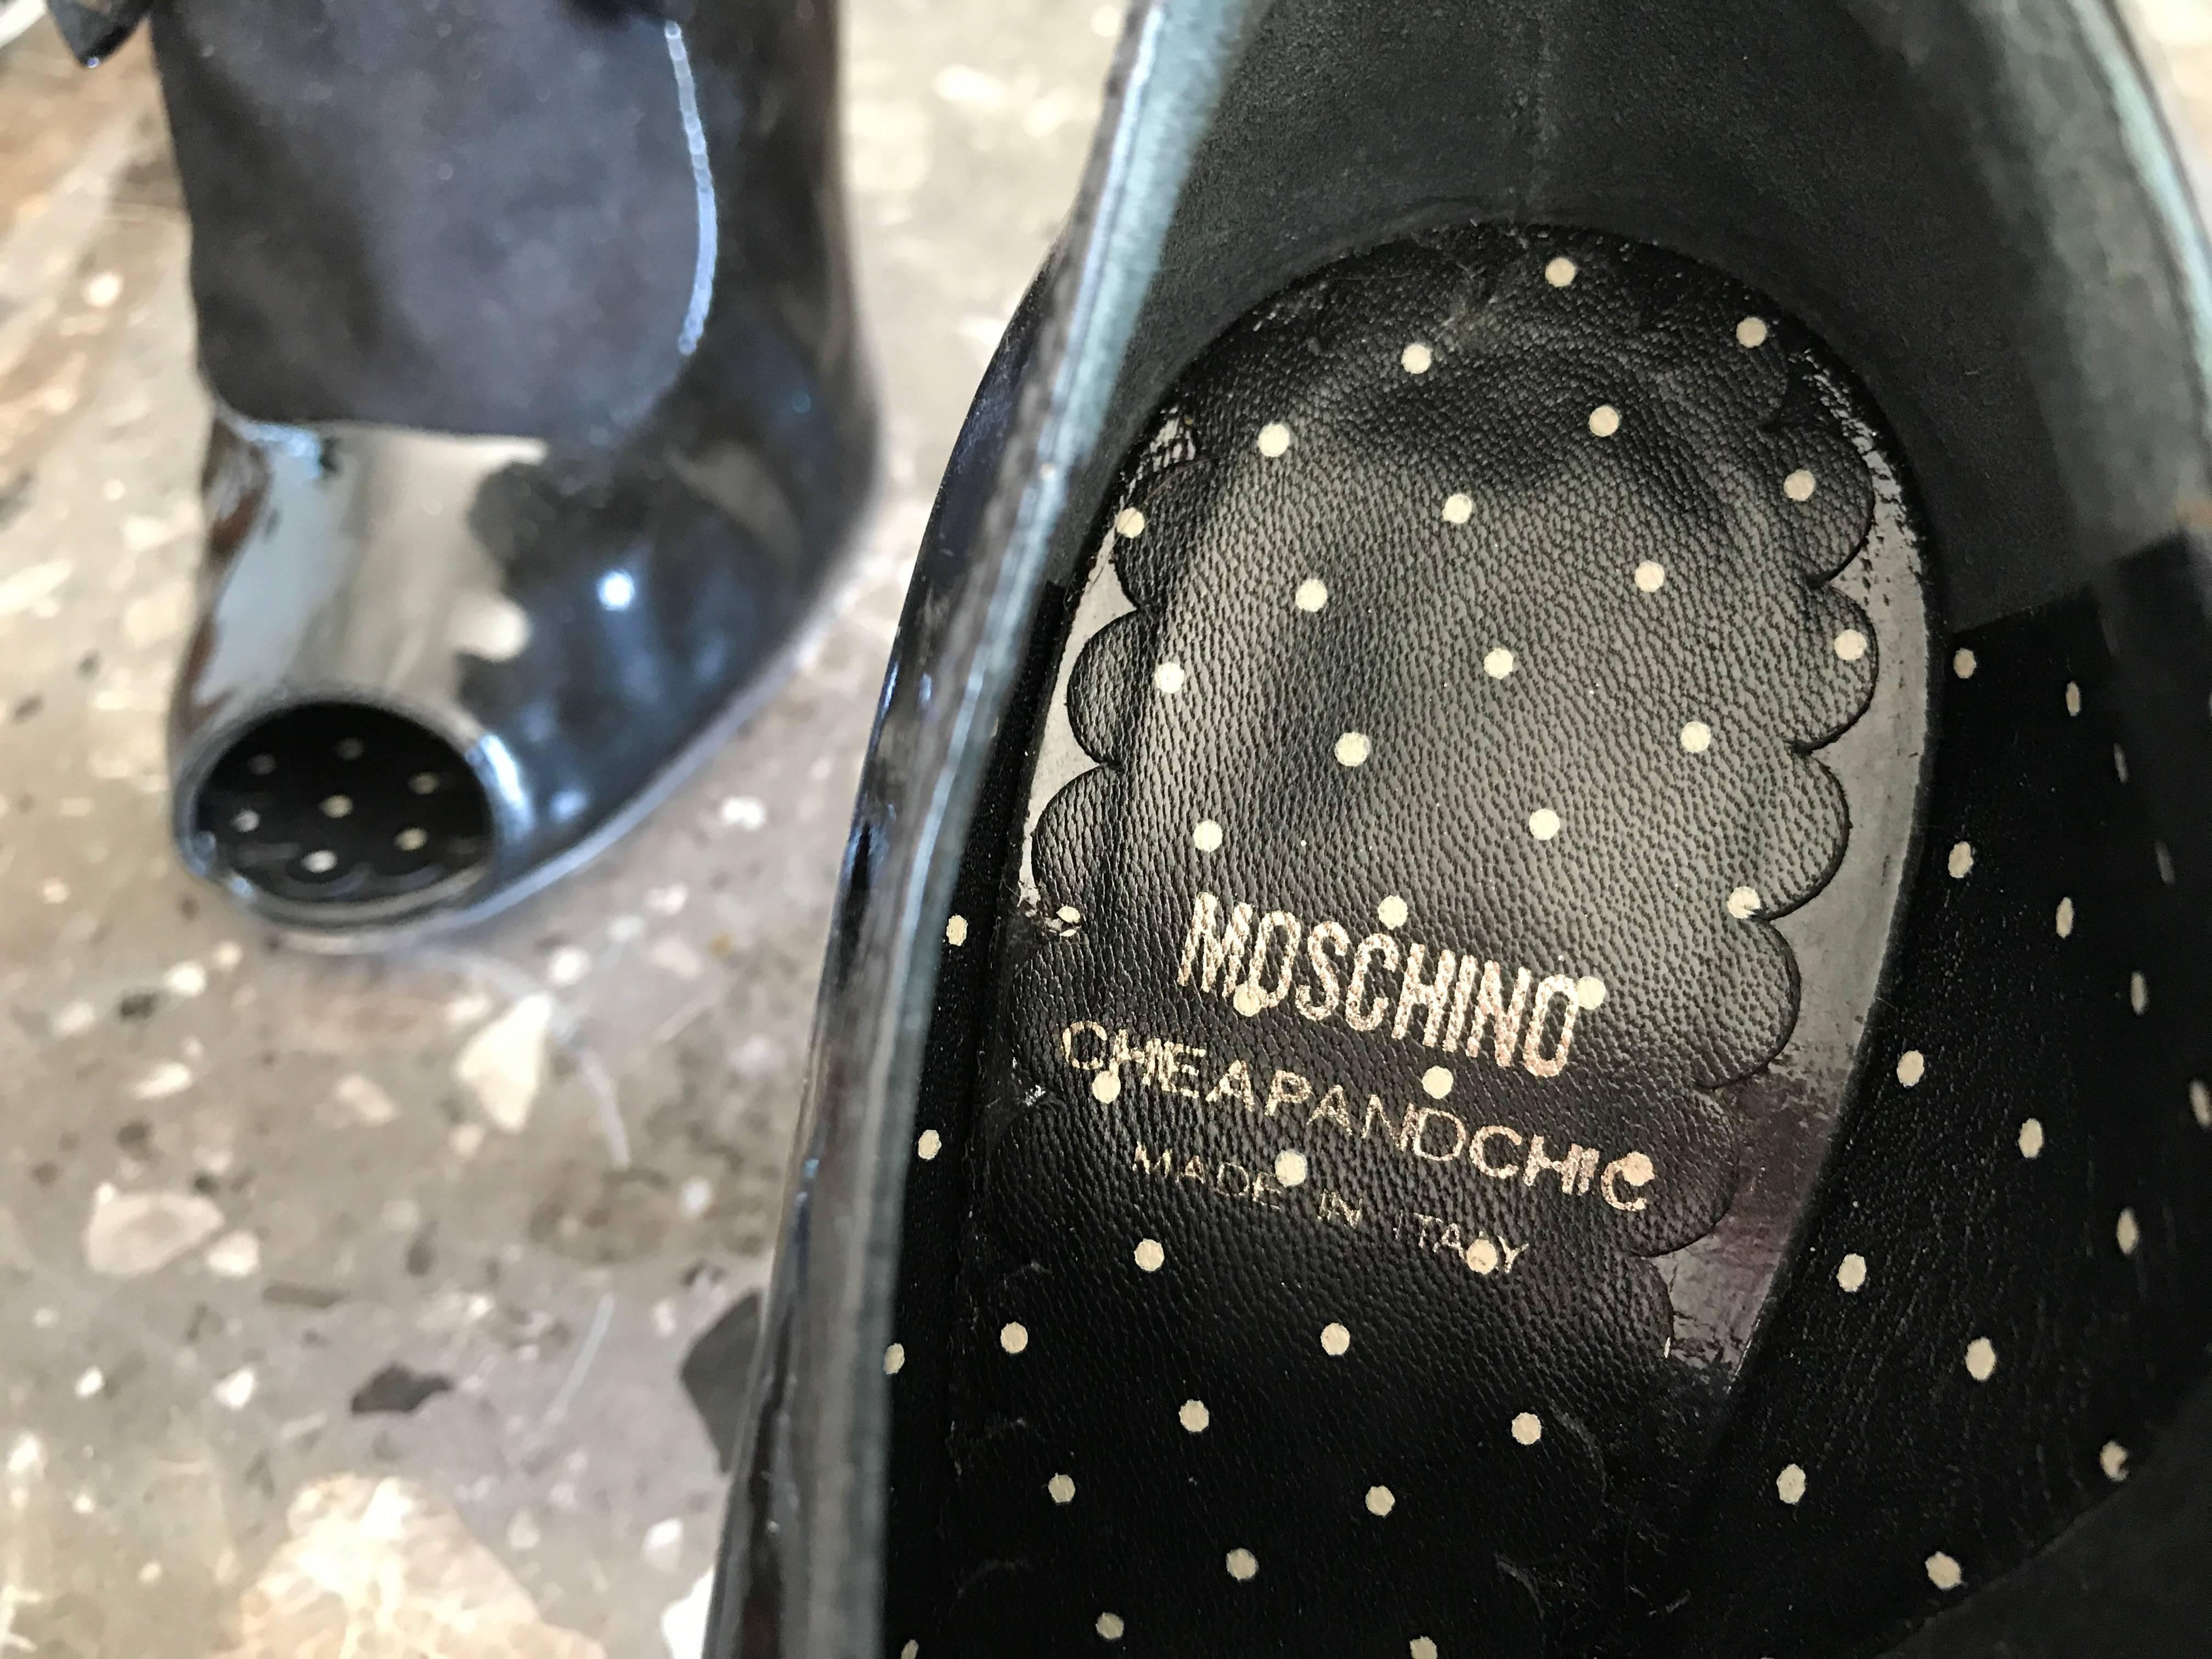 1990s Moschino Cheap and Chic Black Patent Leather Sz 37 / 7 Peep Toe Booties For Sale 4